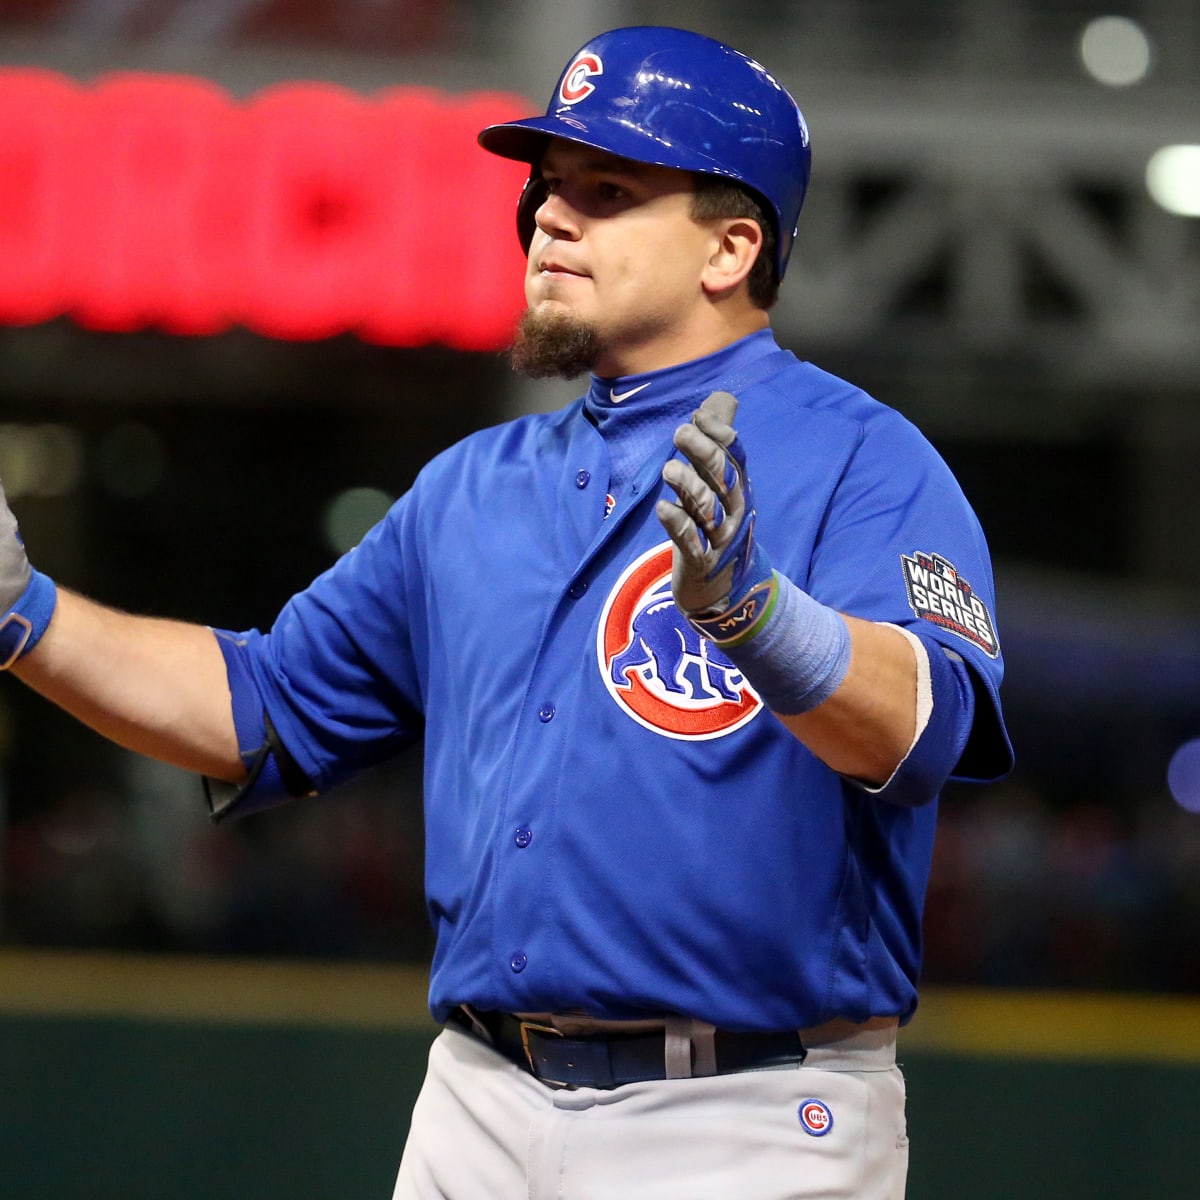 Kyle Schwarber starred in comedy videos with college teammates